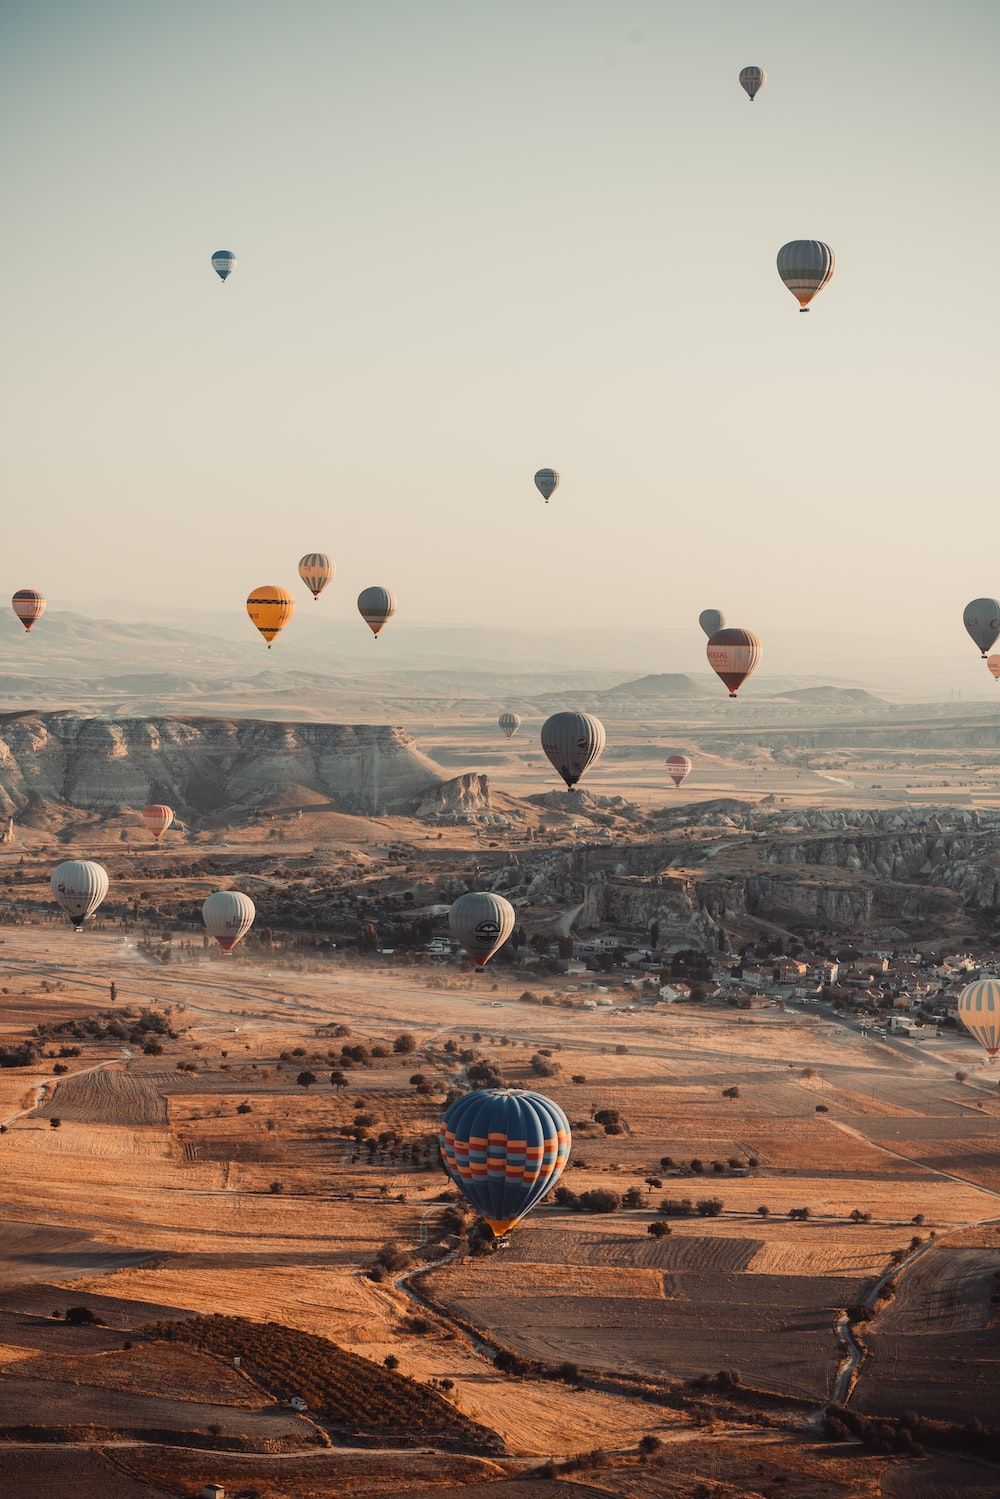 Hot air balloons flying over a valley - Hot air balloons